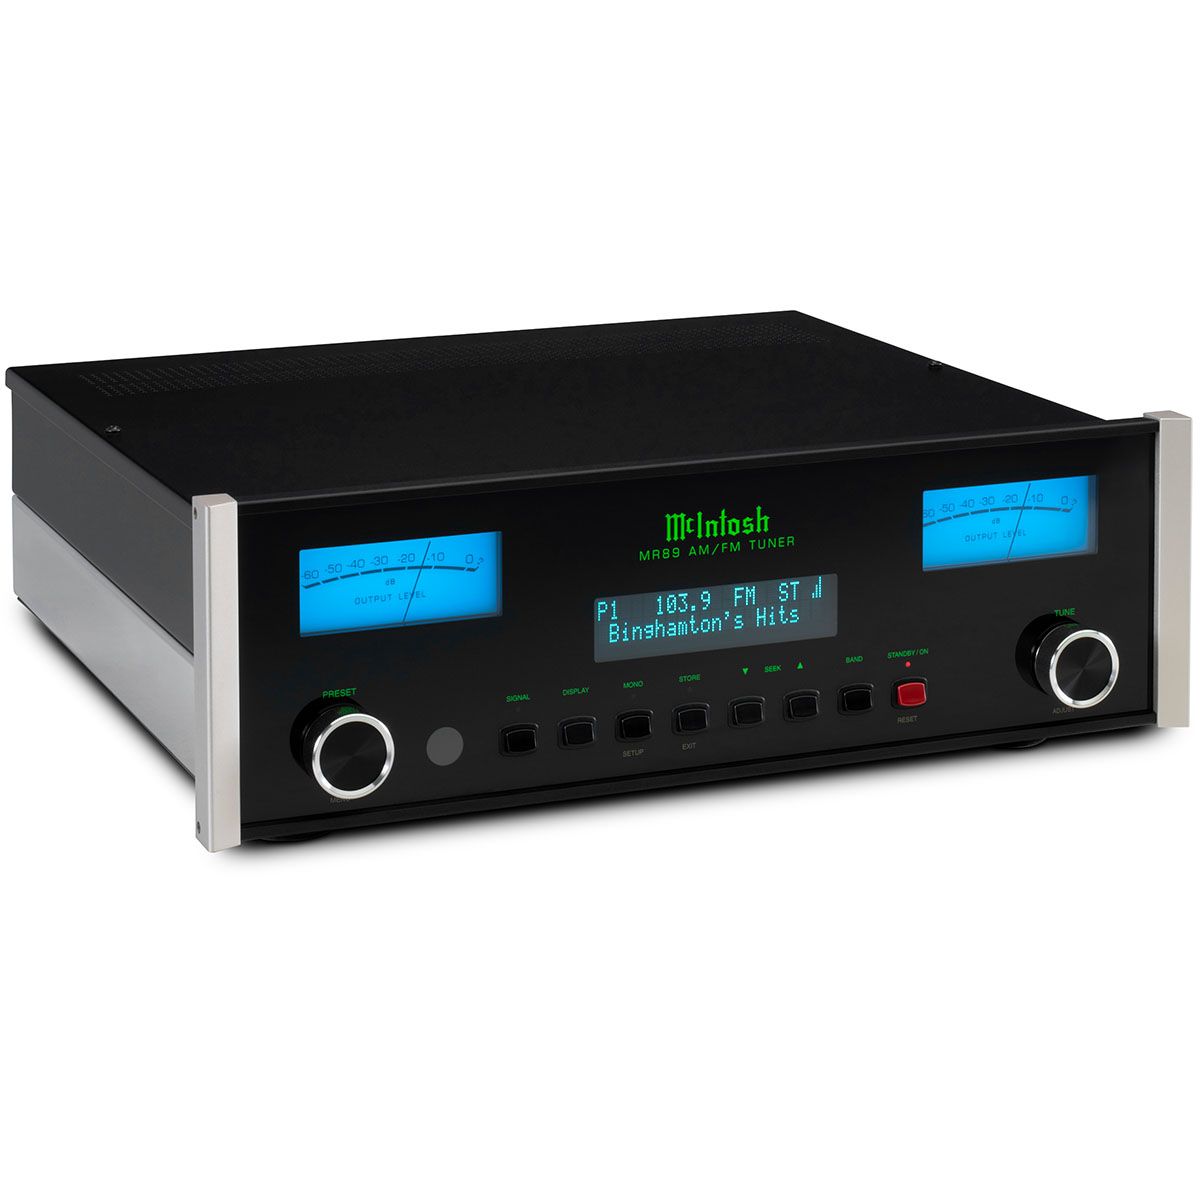 McIntosh MR89 AM/FM Tuner - angled front view